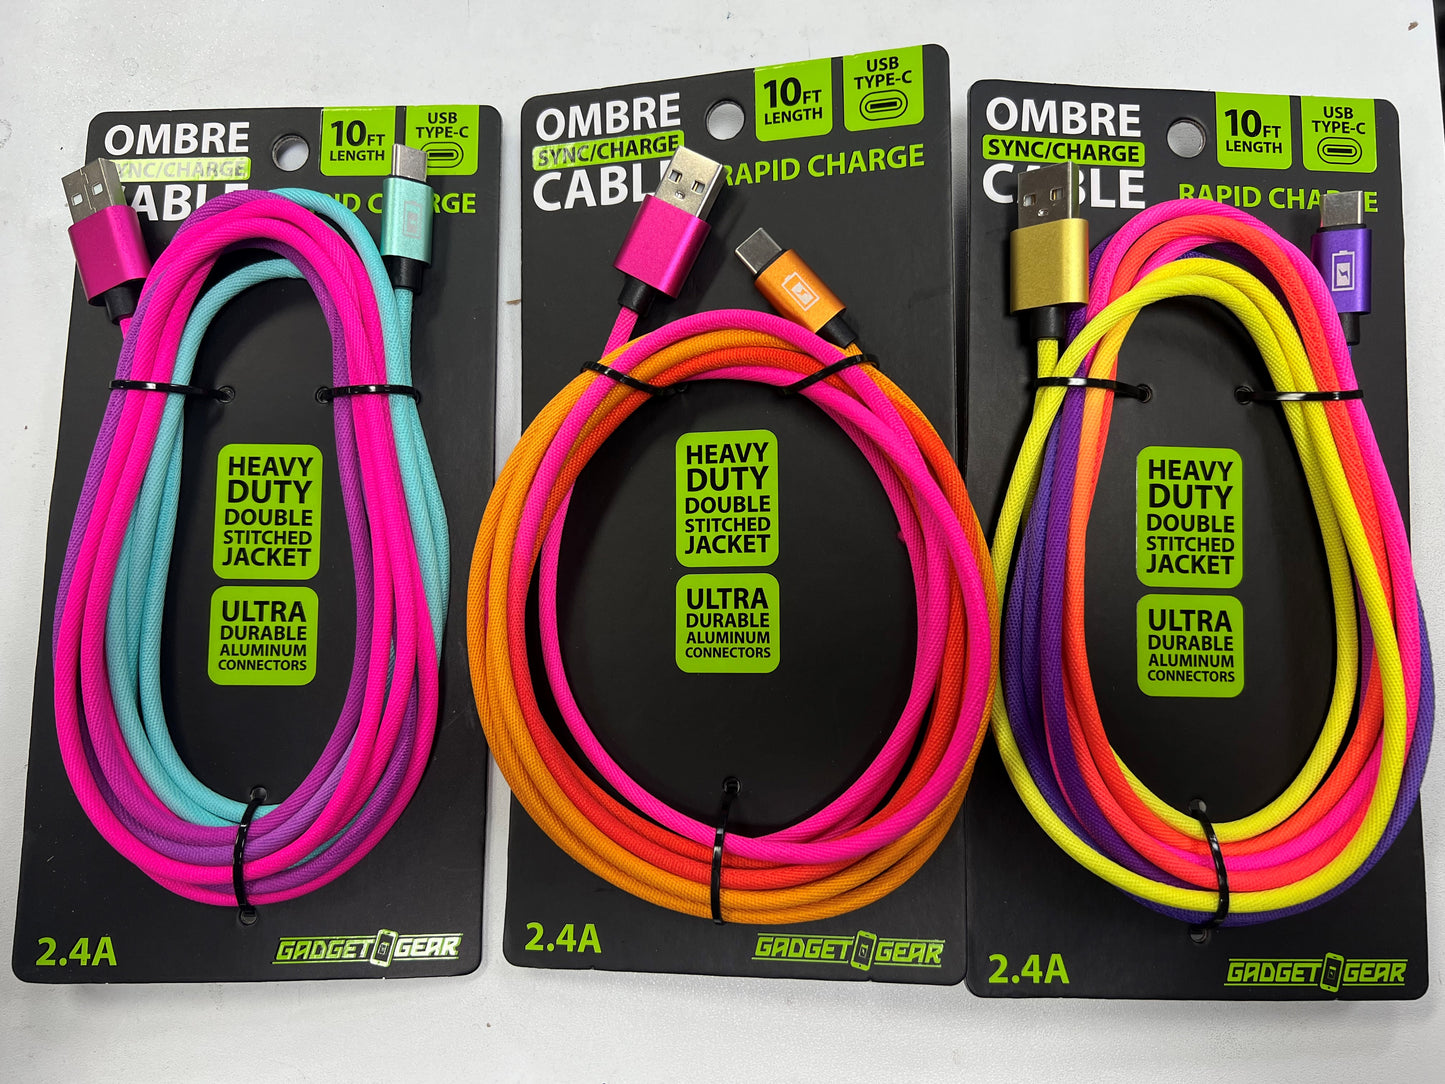 ITEM NUMBER 022741L 10FT COLOR FADE CABLE TYPE C  - STORE SURPLUS NO DISPLAY 3 PIECES PER PACK